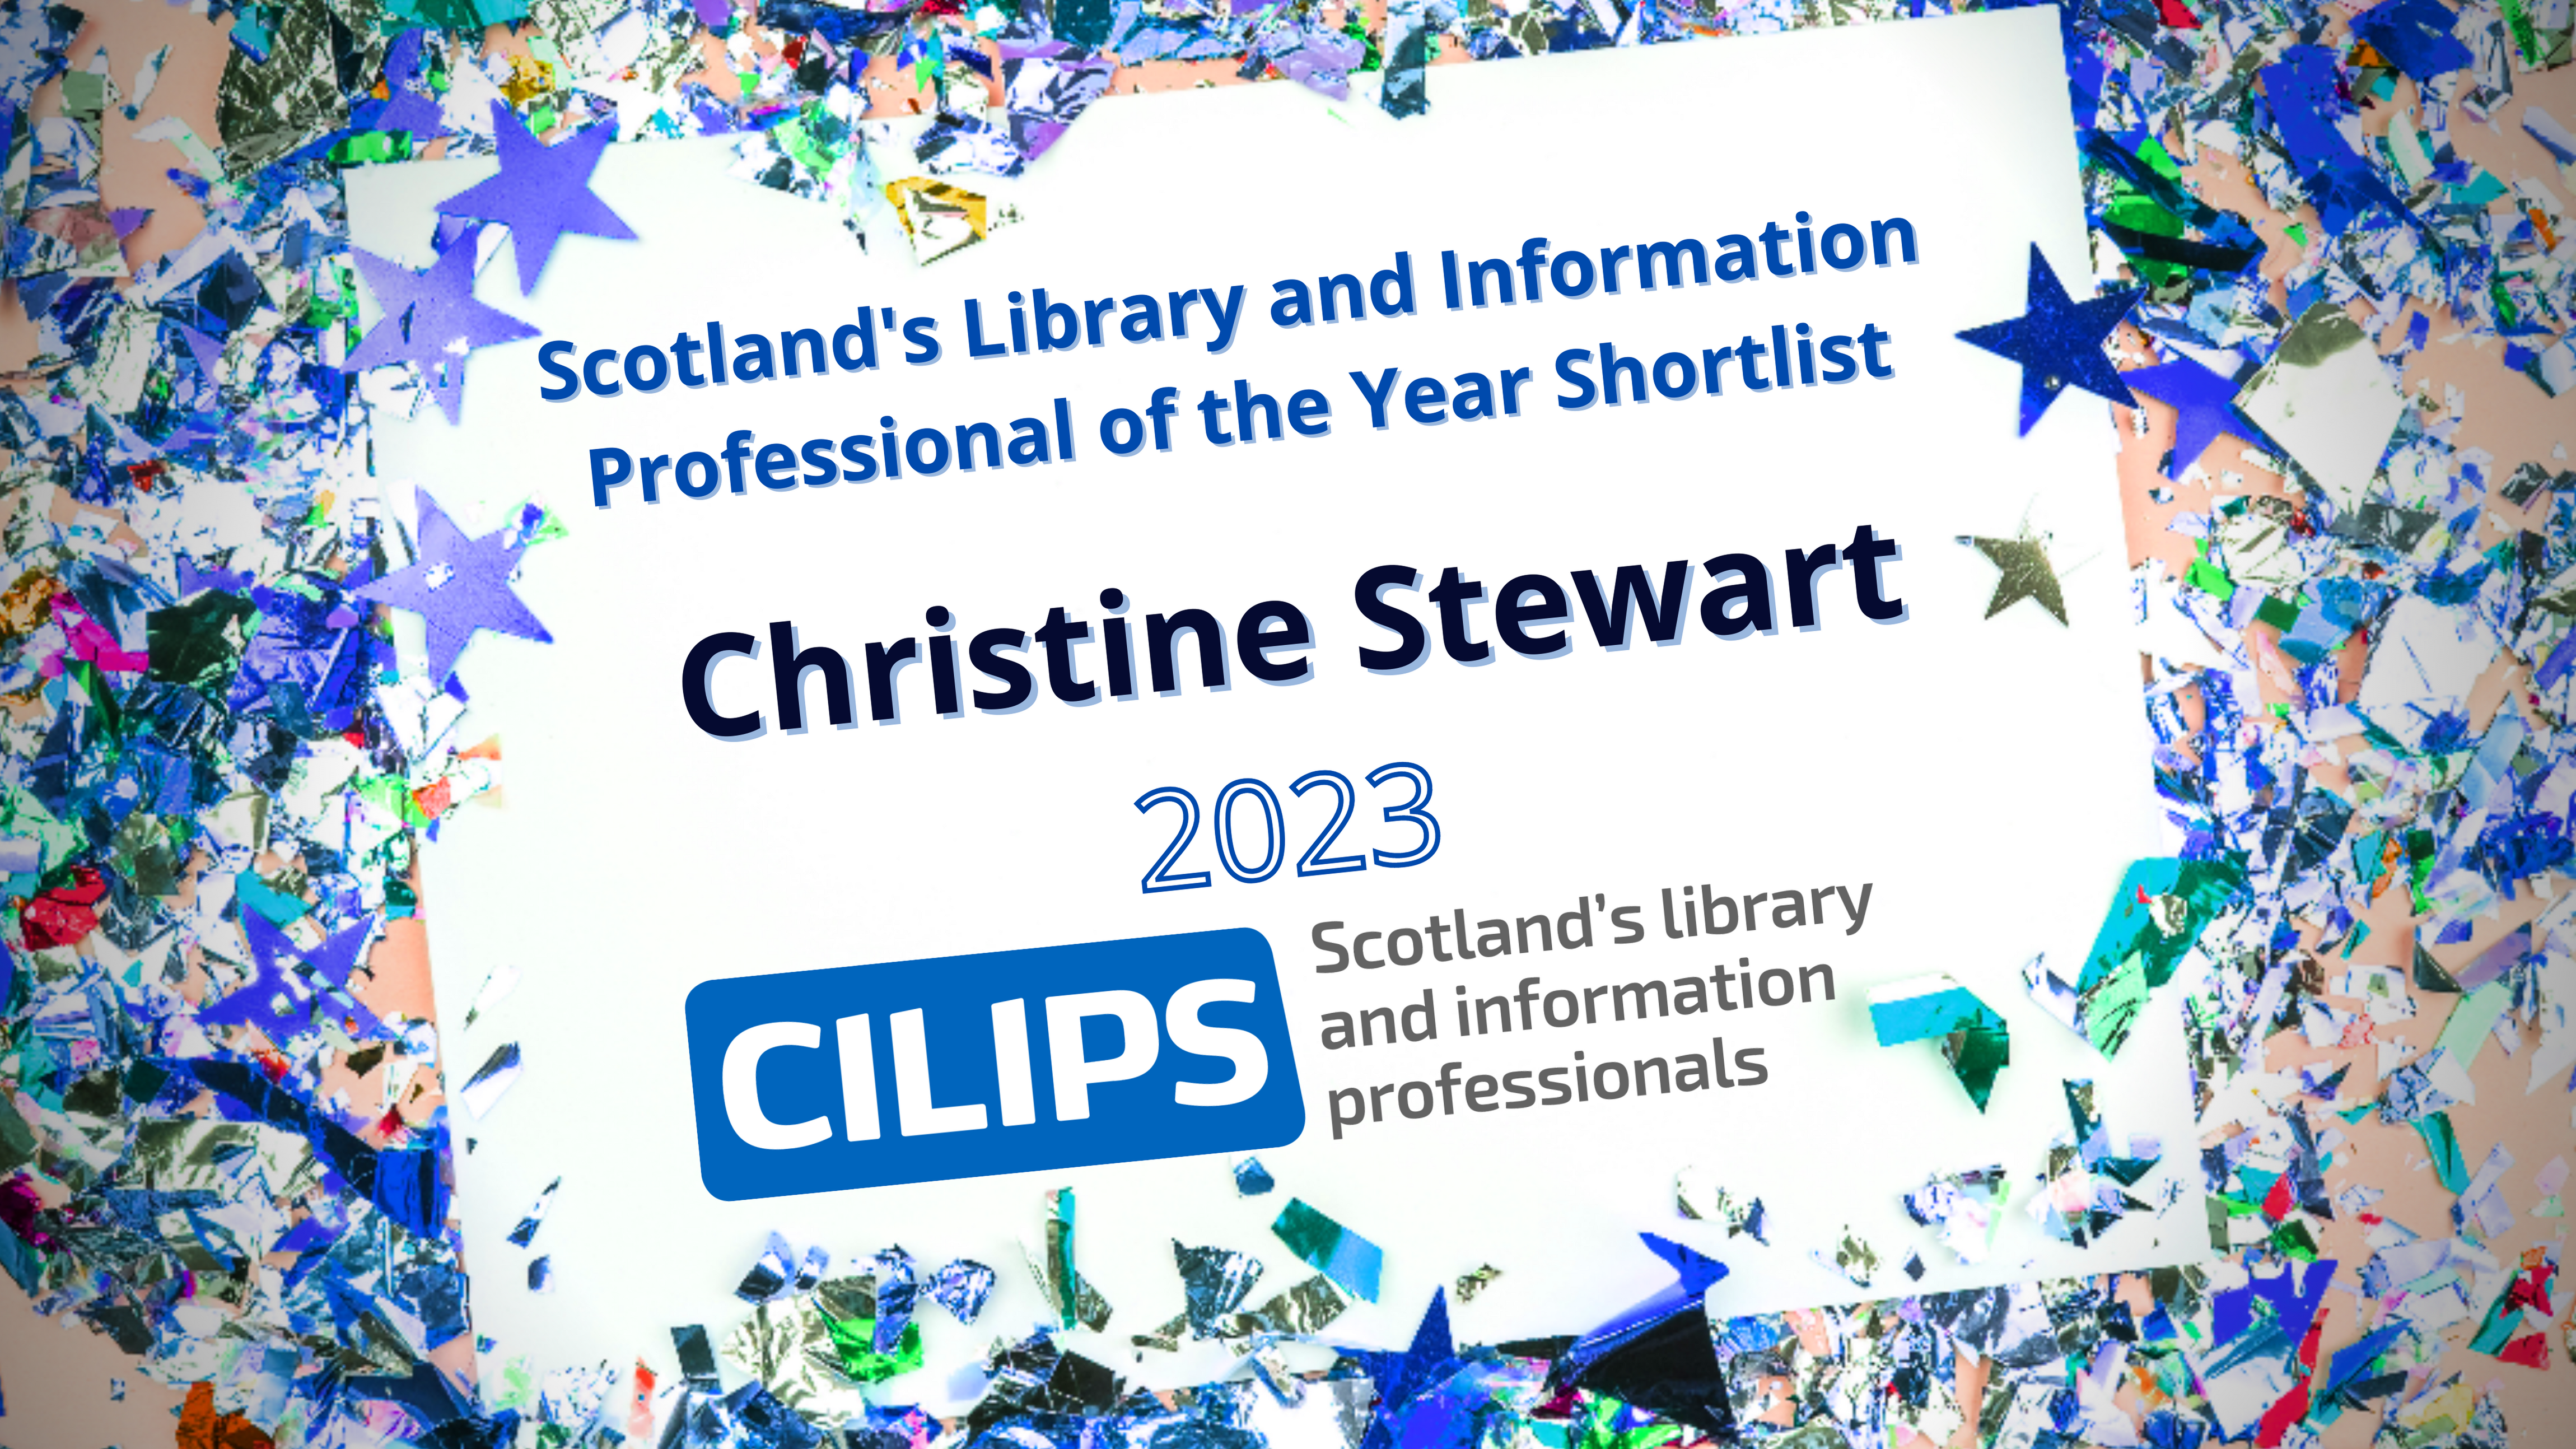 Scotland's library and Information Professional of the Year Shortlist. Christine Stewart, 2023. CILIPS blue and grey logo. White paper background with mixed blue confetti around the outside.